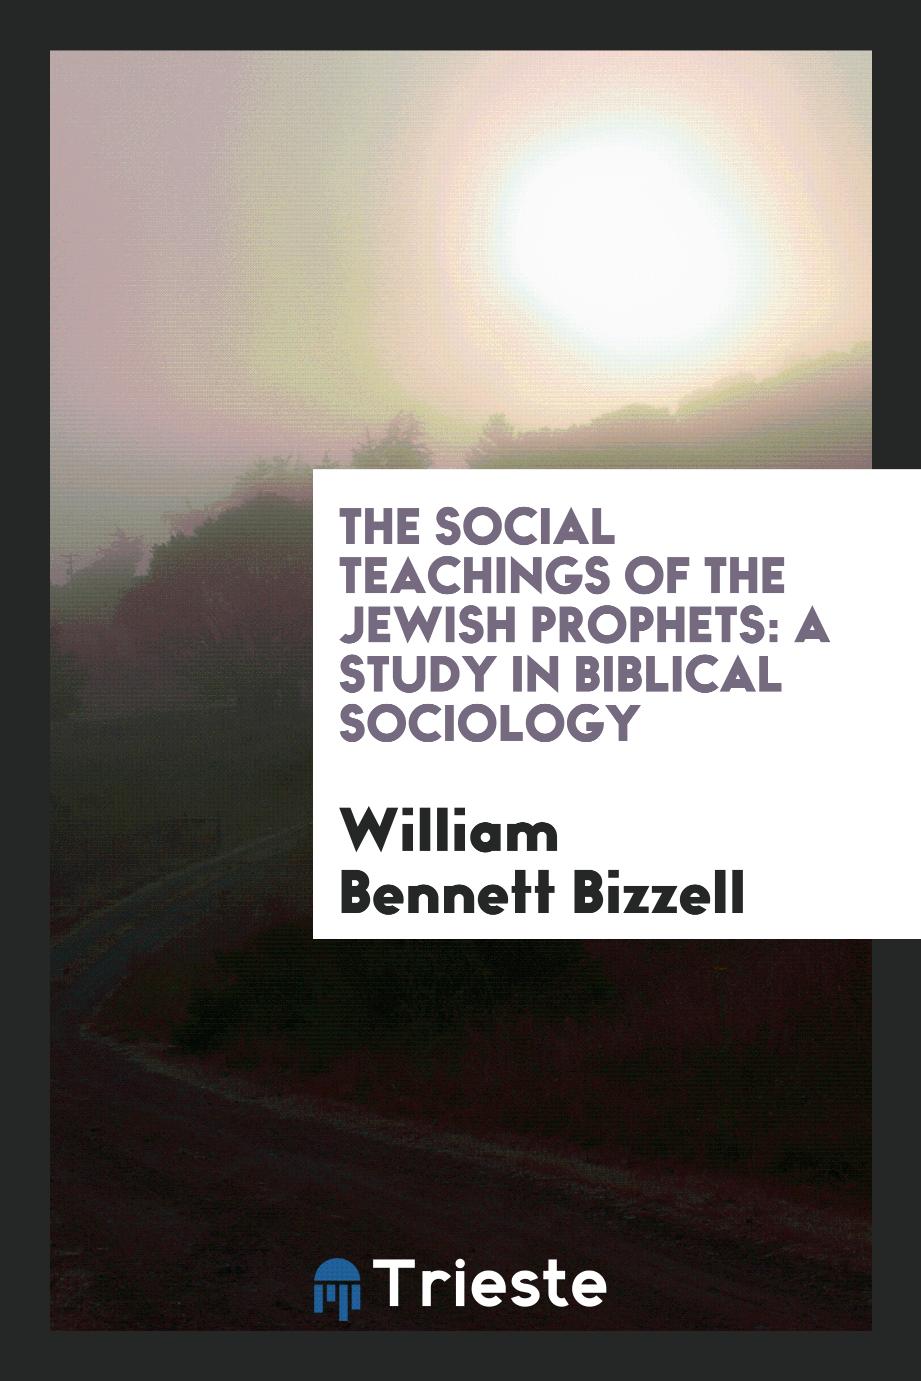 The social teachings of the Jewish prophets: a study in Biblical sociology